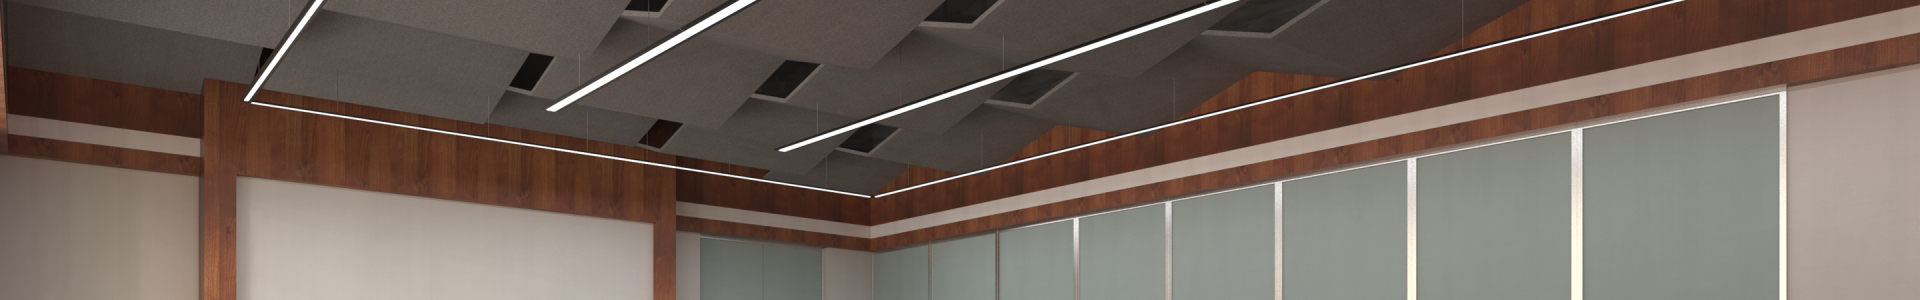 Cubra suspended with acoustic ceiling